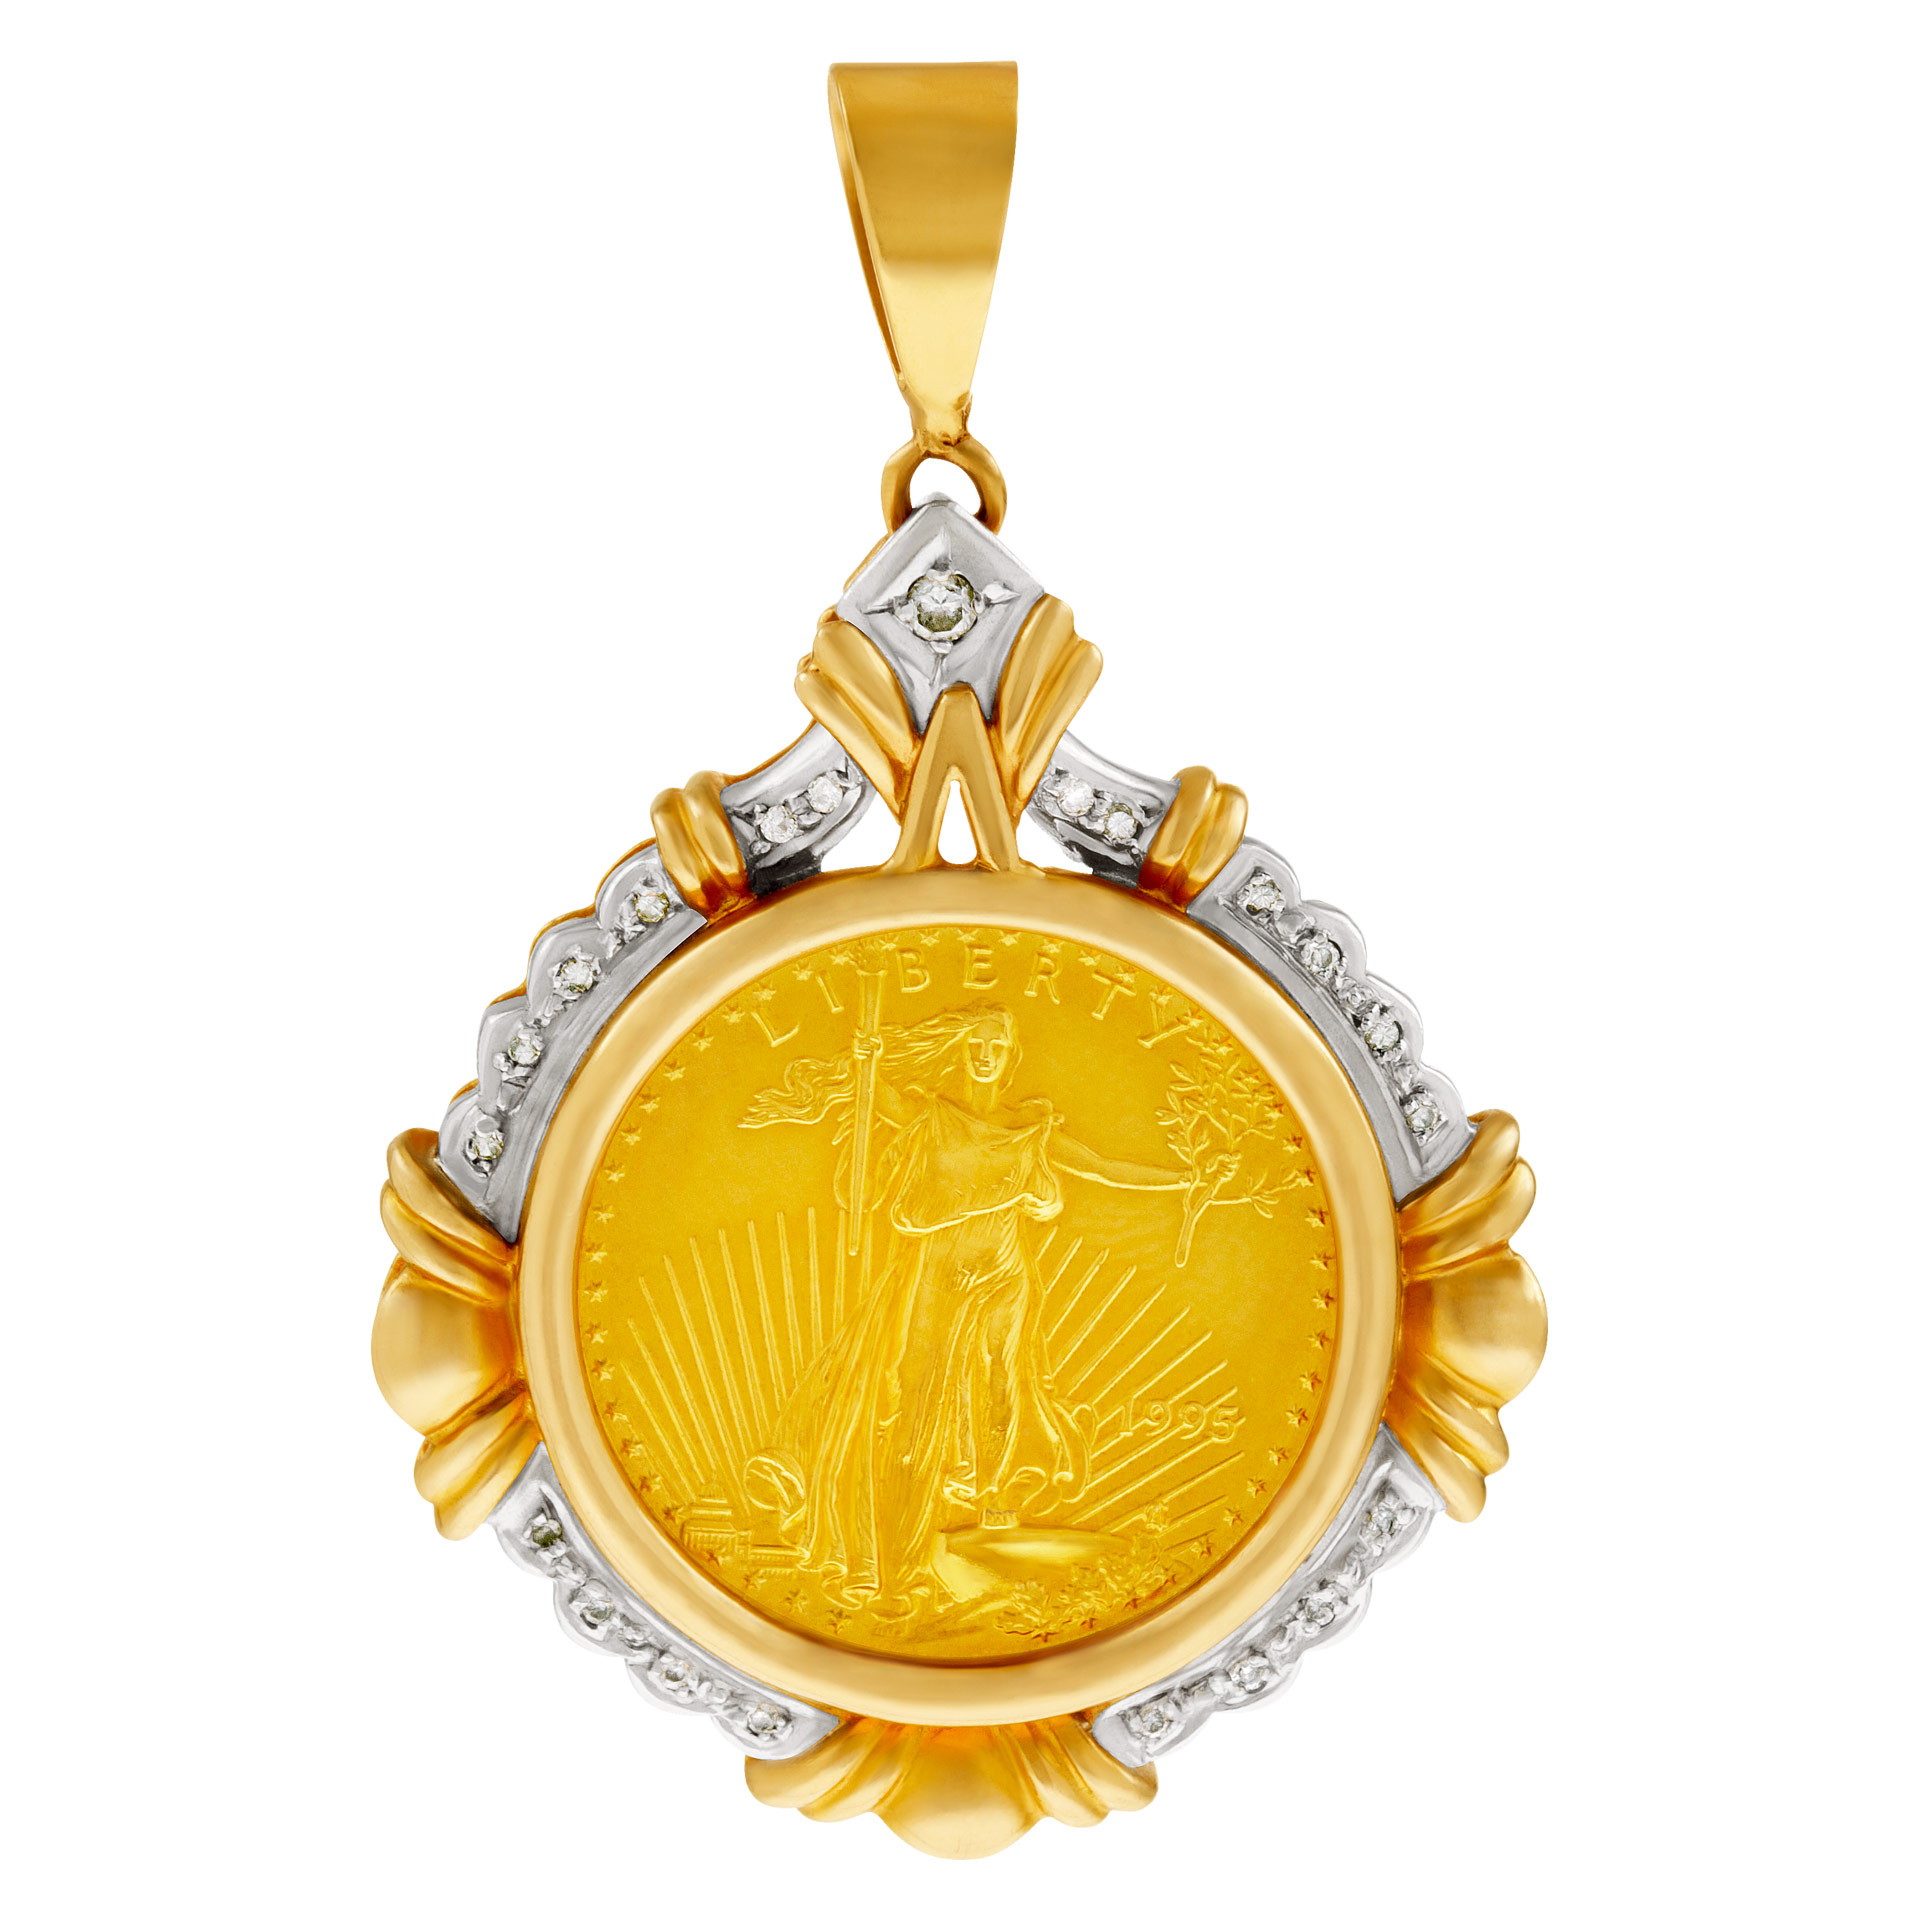 Eagle pendant $10 gold coin in 14k yellow gold and diamonds